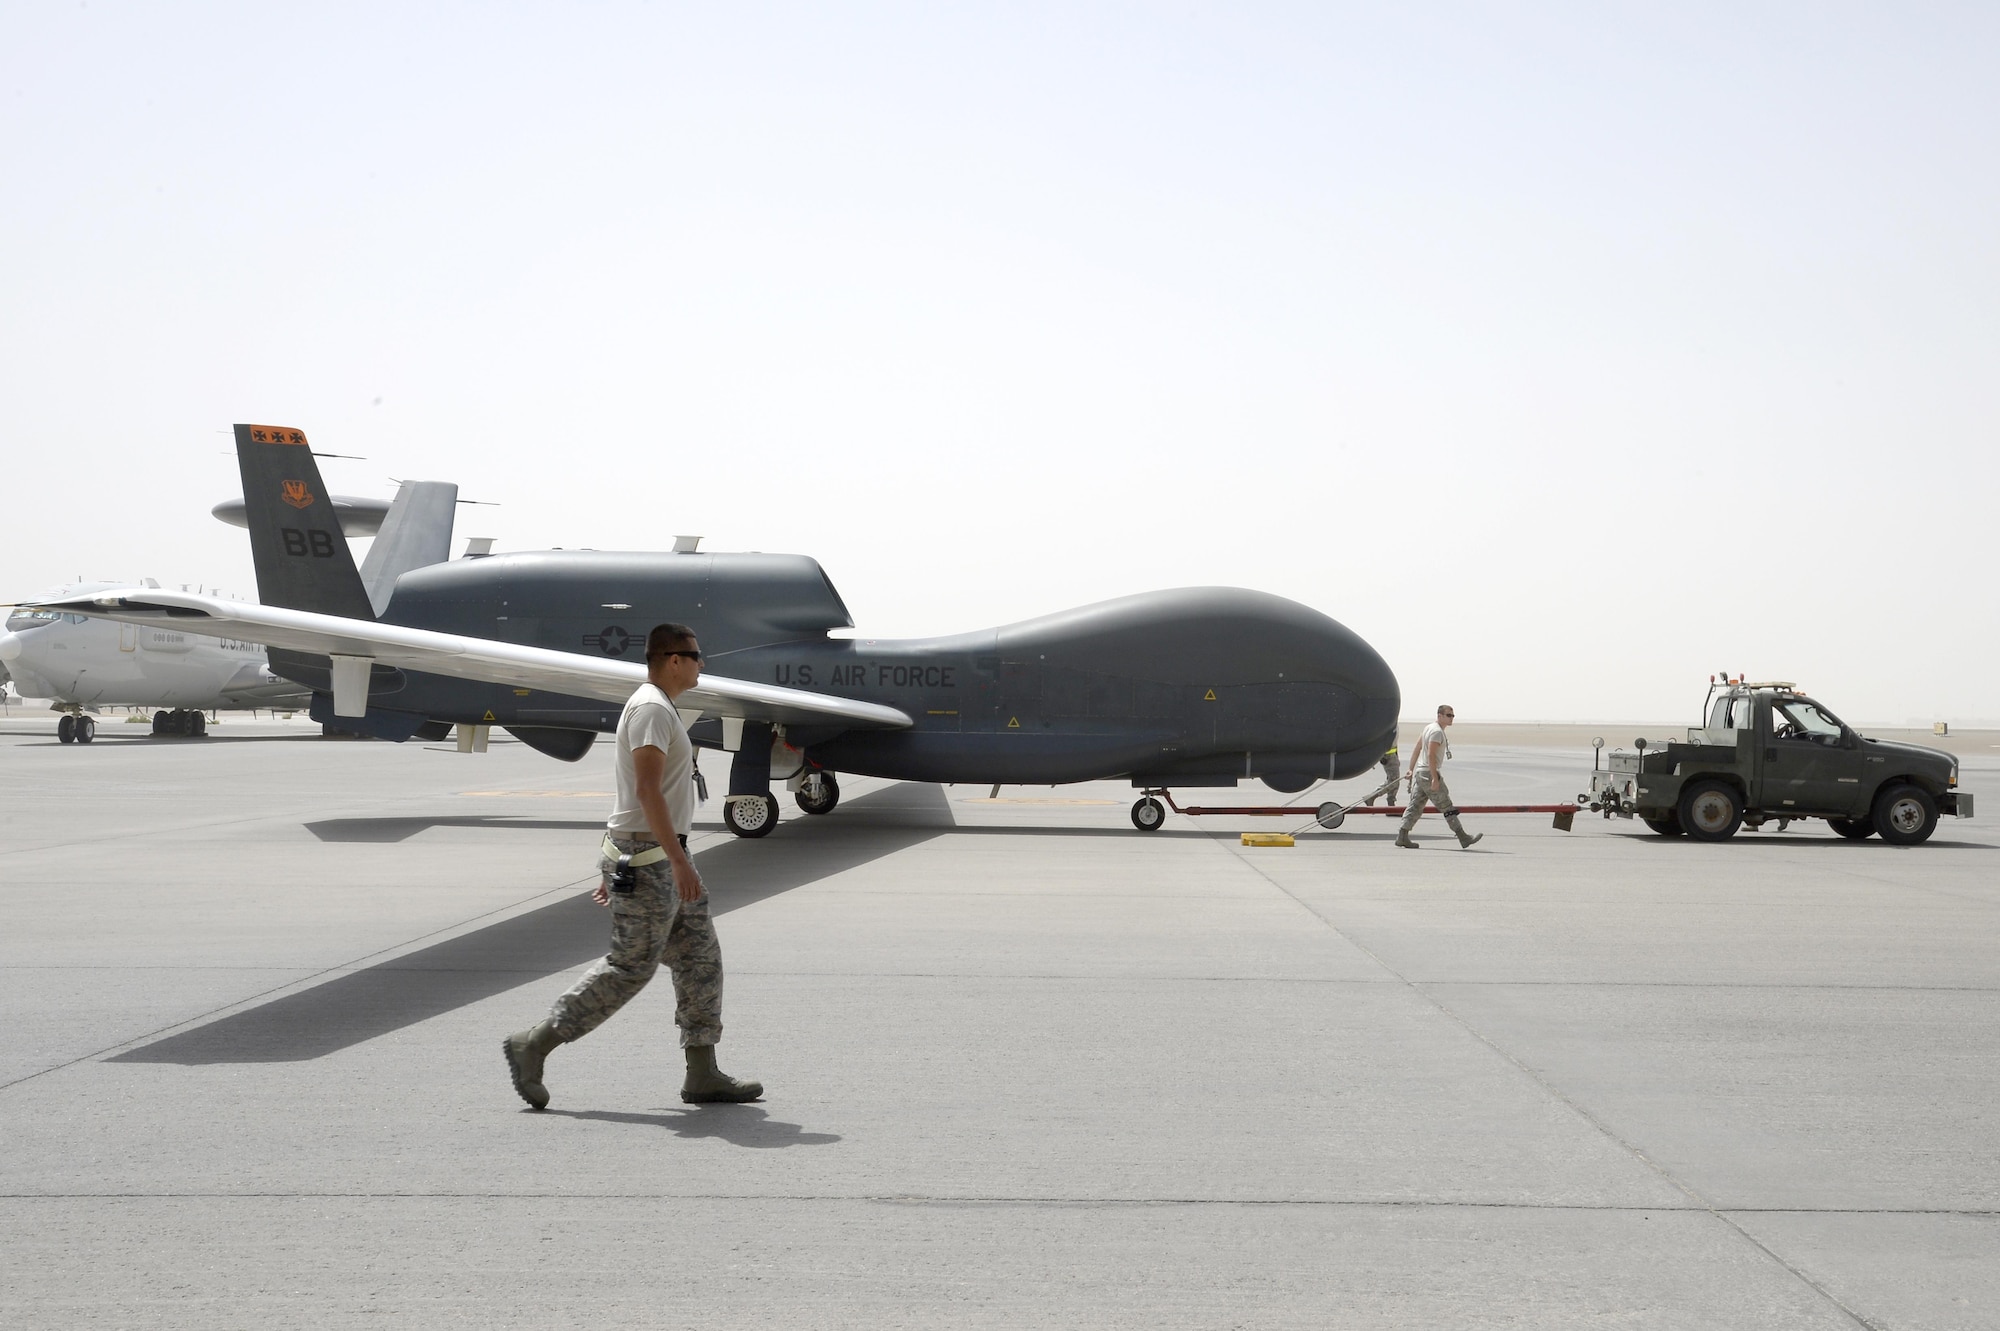 Airmen from Hawk Aircraft Maintenance Unit welcome RQ-4 Global Hawk aircraft 2019 after its 10,000 flying hour milestone flight at an undisclosed location in Southwest Asia Mar. 8, 2015. Block 20s were initially fielded with imagery intelligence (IMINT)-only capabilities. Three Block 20s have been converted to an EQ-4 communication relay configuration, carrying the Battlefield Airborne Communication Node (BACN) payload. (U.S. Air Force photo/Tech. Sgt. Marie Brown)